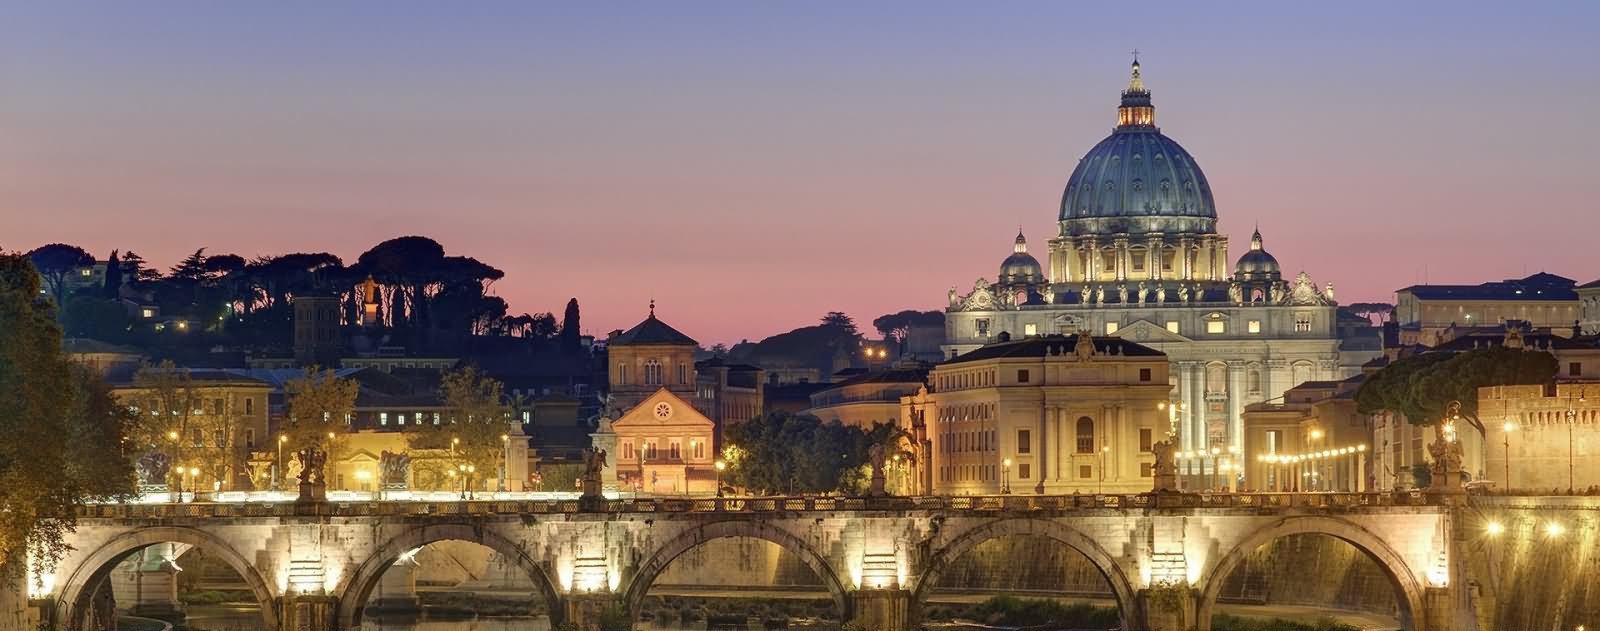 Panorama Night View Picture Of St. Peter's Basilica